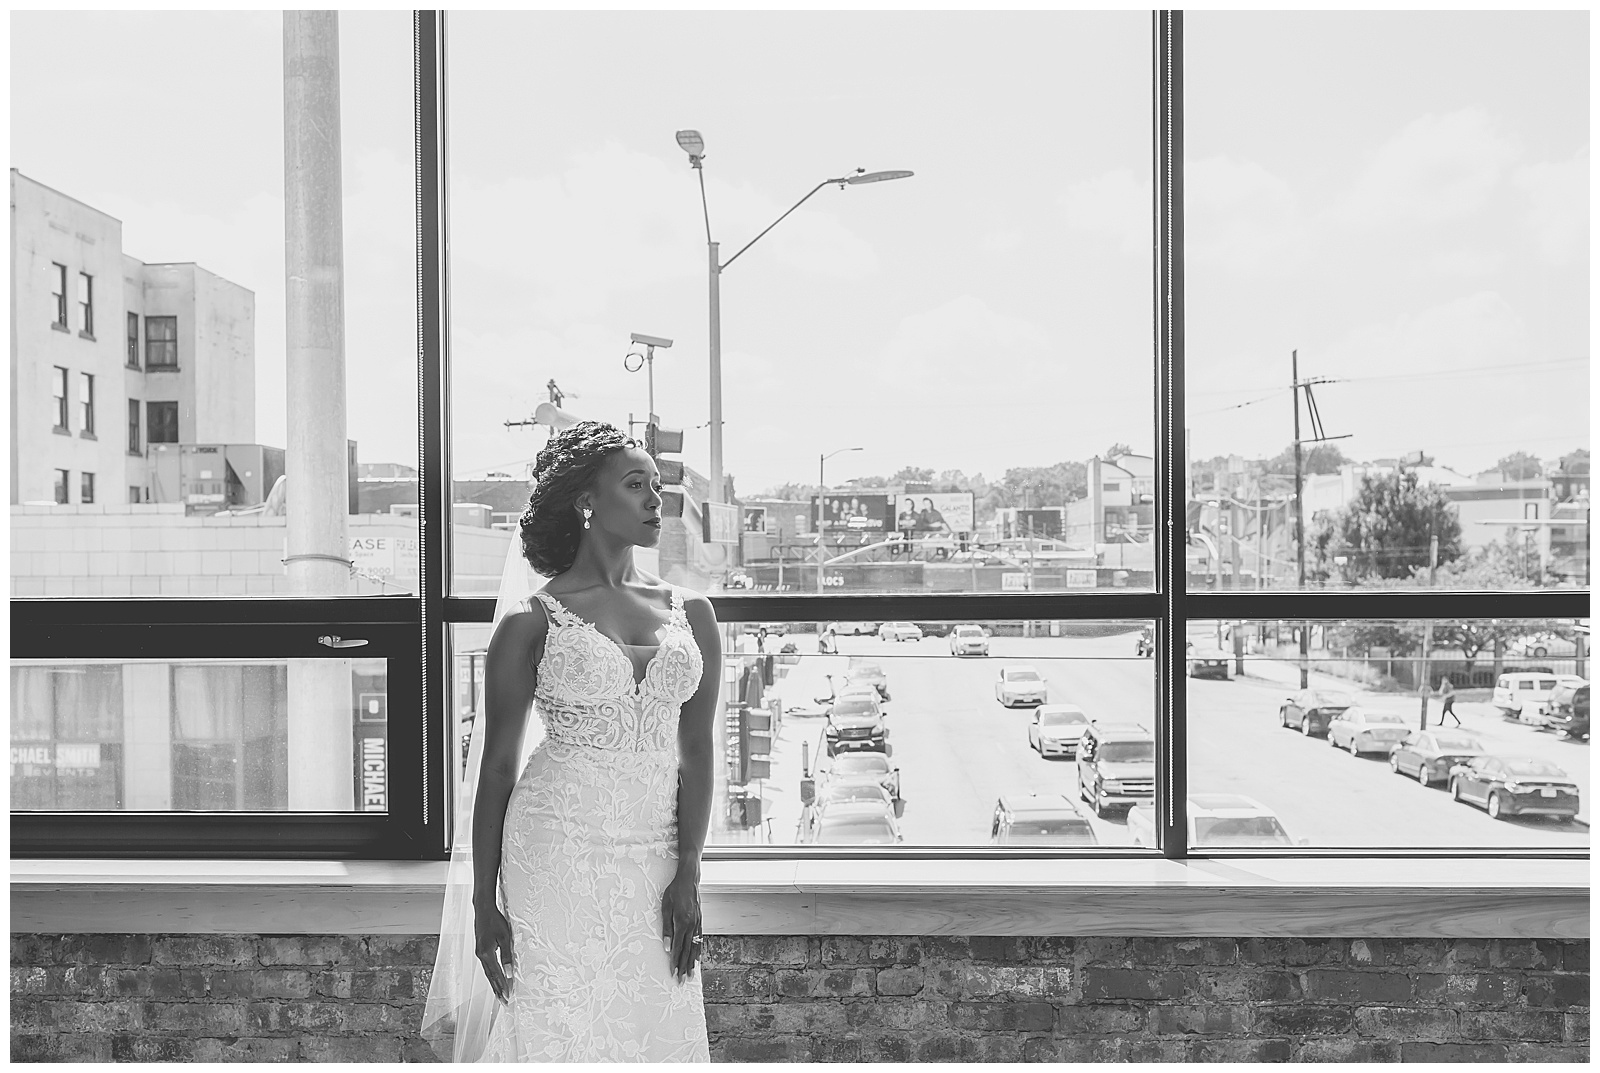 Photography and videography at 7 East Event Space by Kansas City wedding photographers Wisdom-Watson Weddings.